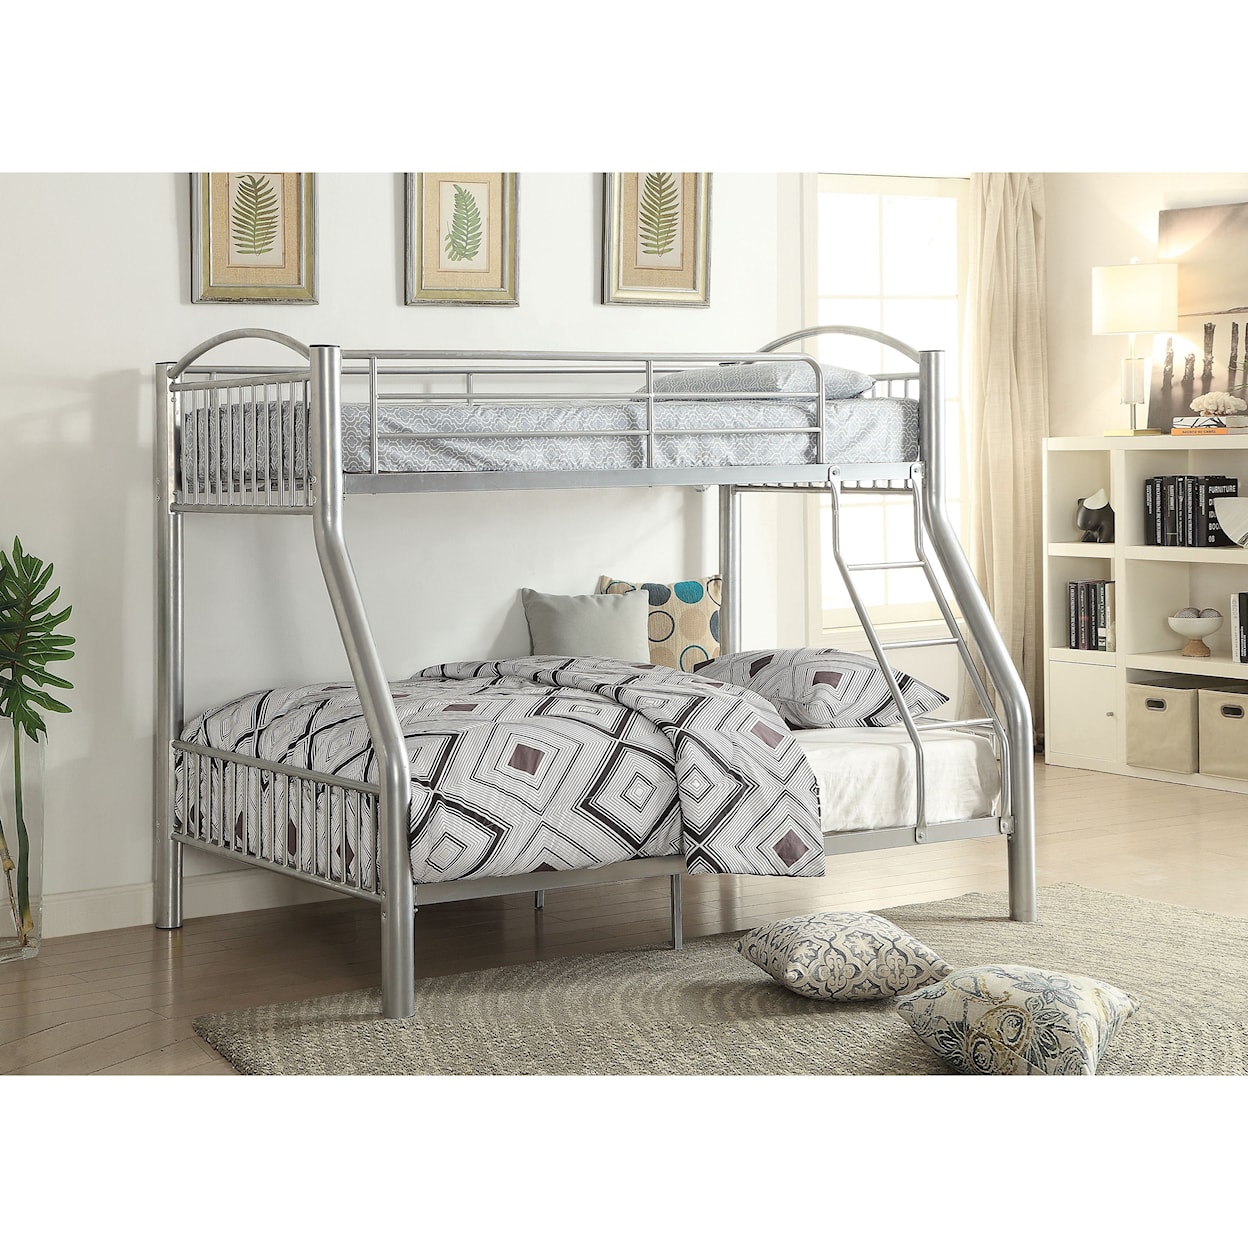 Acme Furniture Cayelynn Full over Twin Bunk Bed